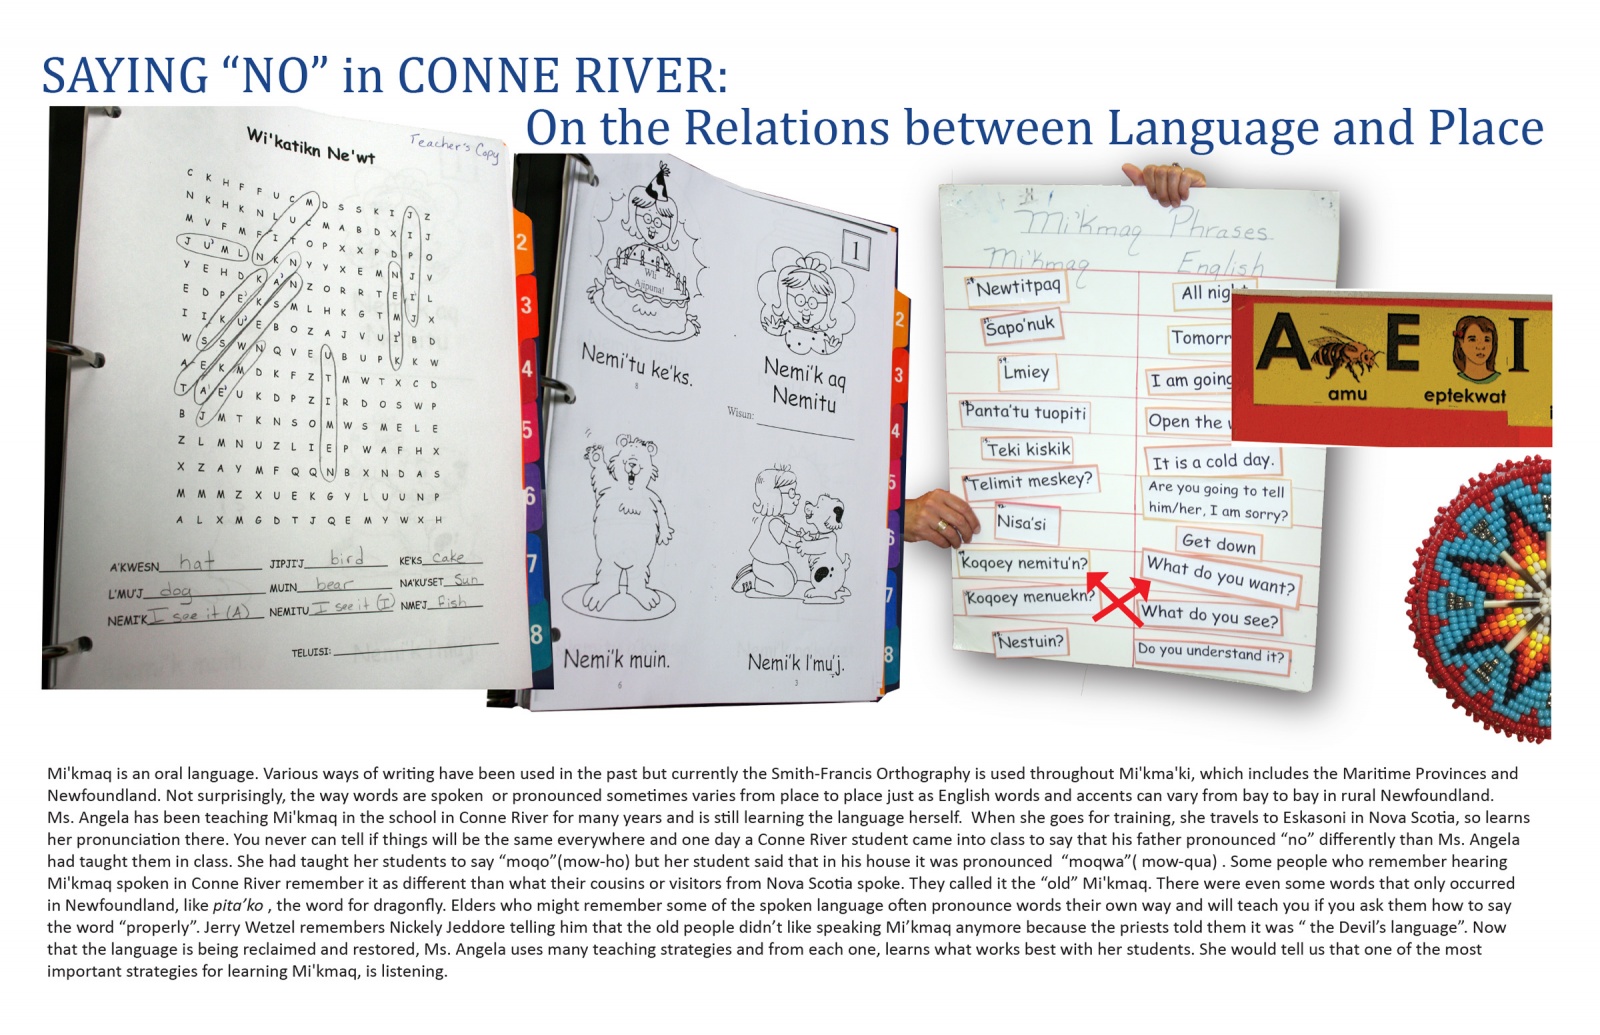 Saying “No” in Conne River: On the Relations Between Language and Place